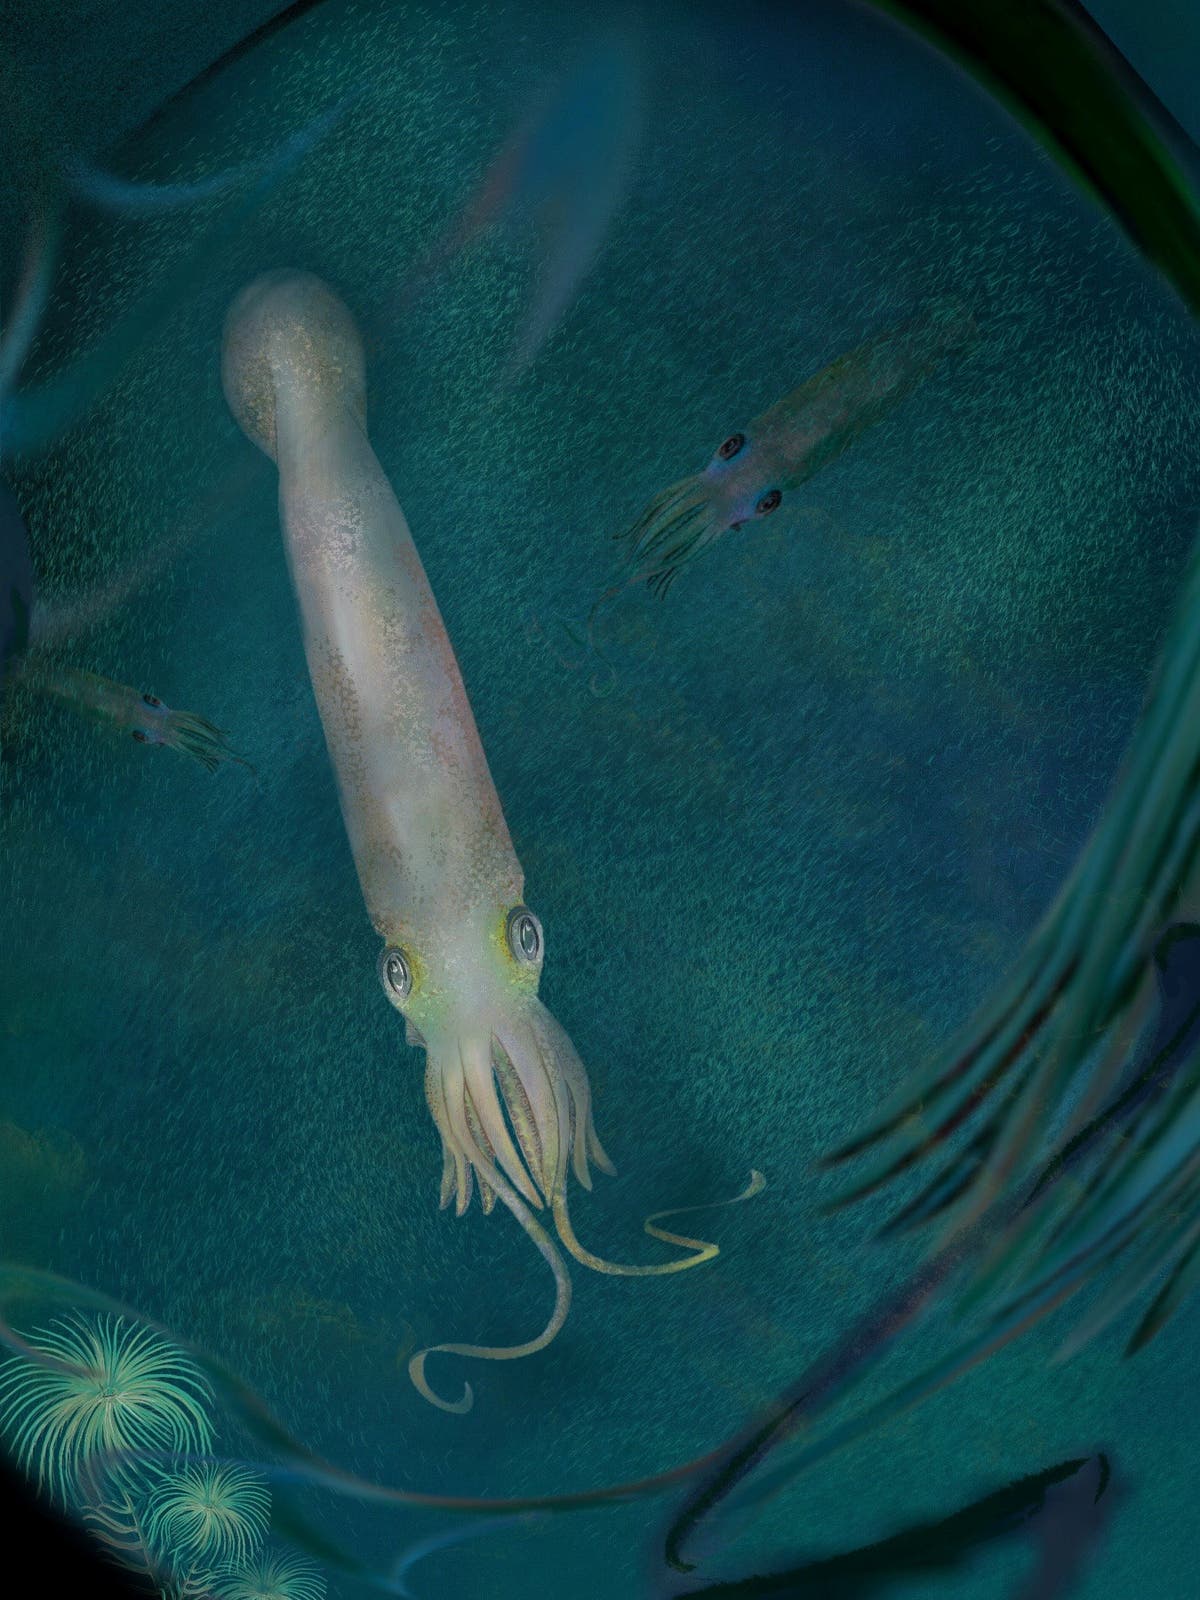 Ten-armed squid thought to be 328 million years old named after Joe Biden